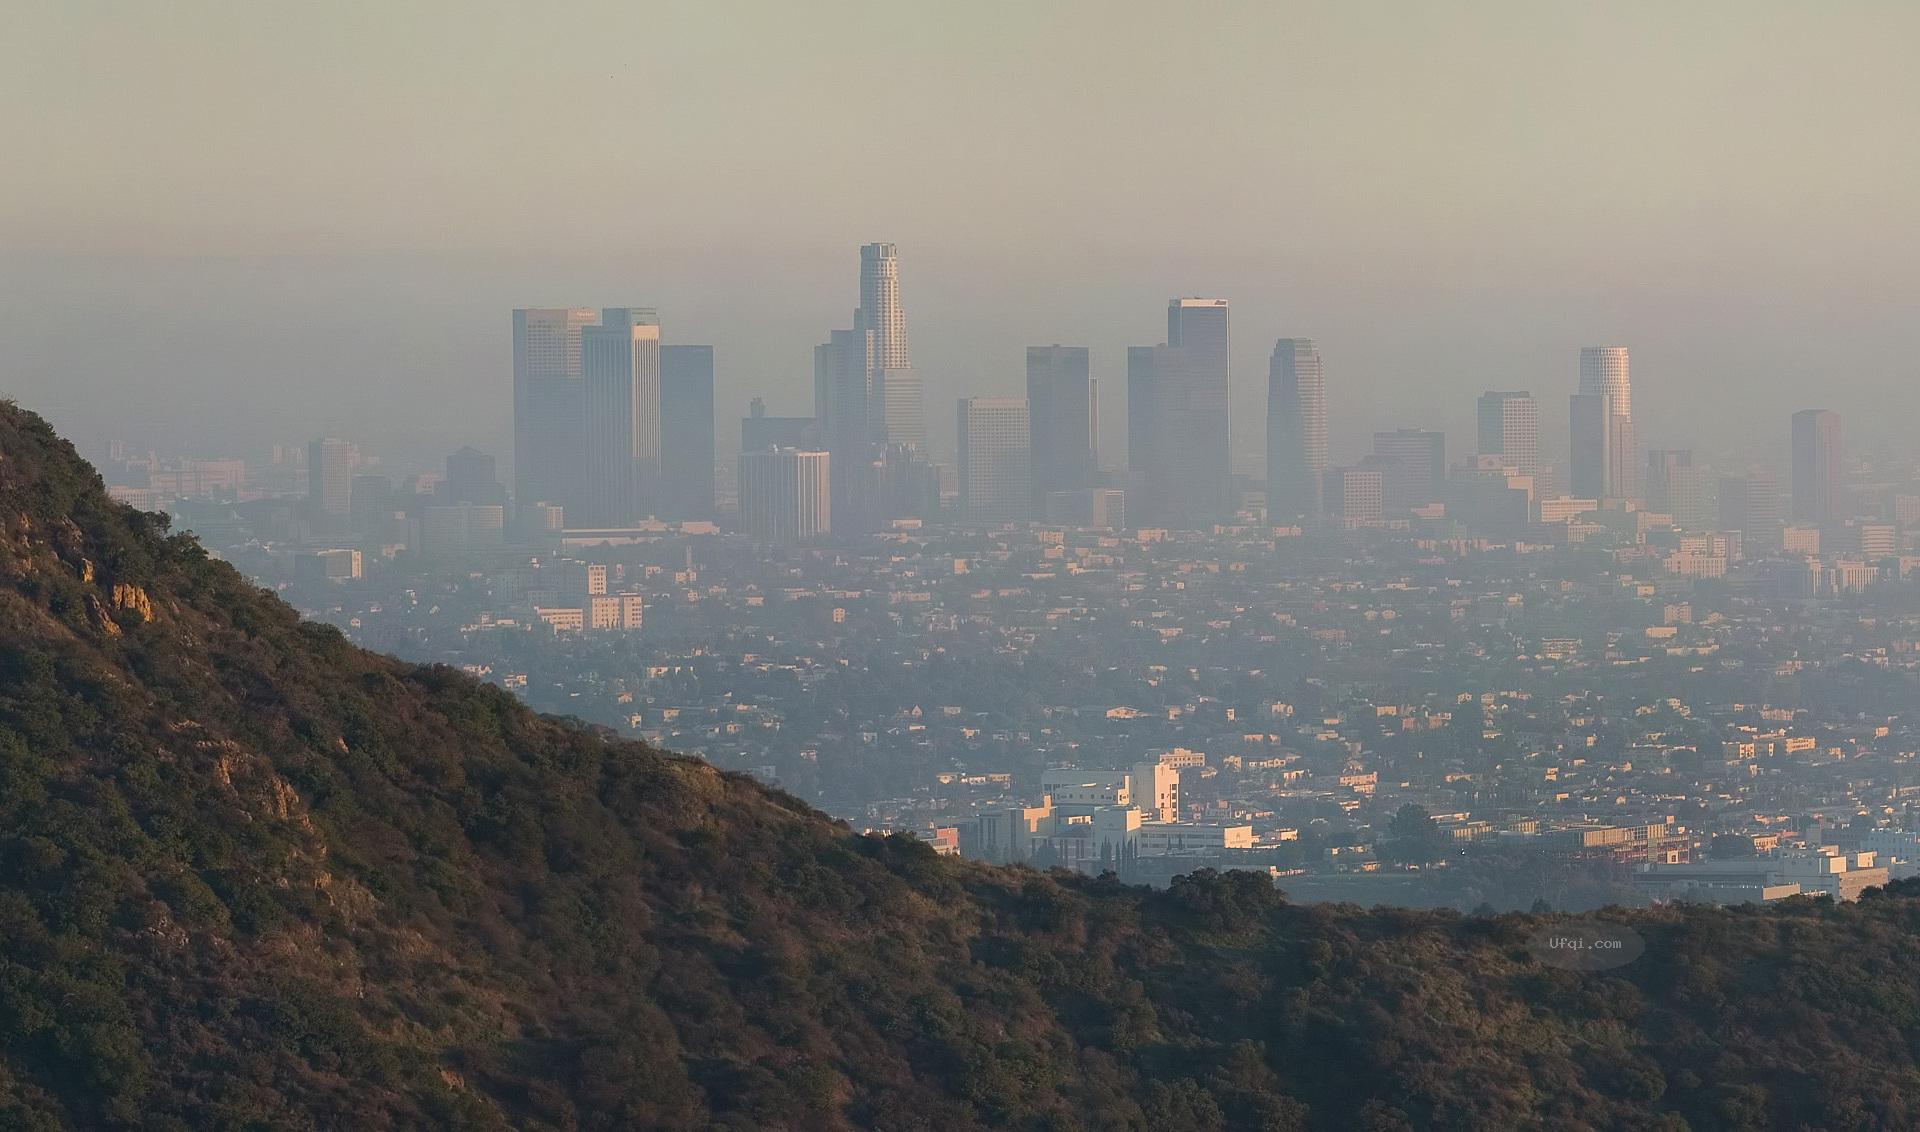 Los_Angeles_Pollution_(cropped).jpg